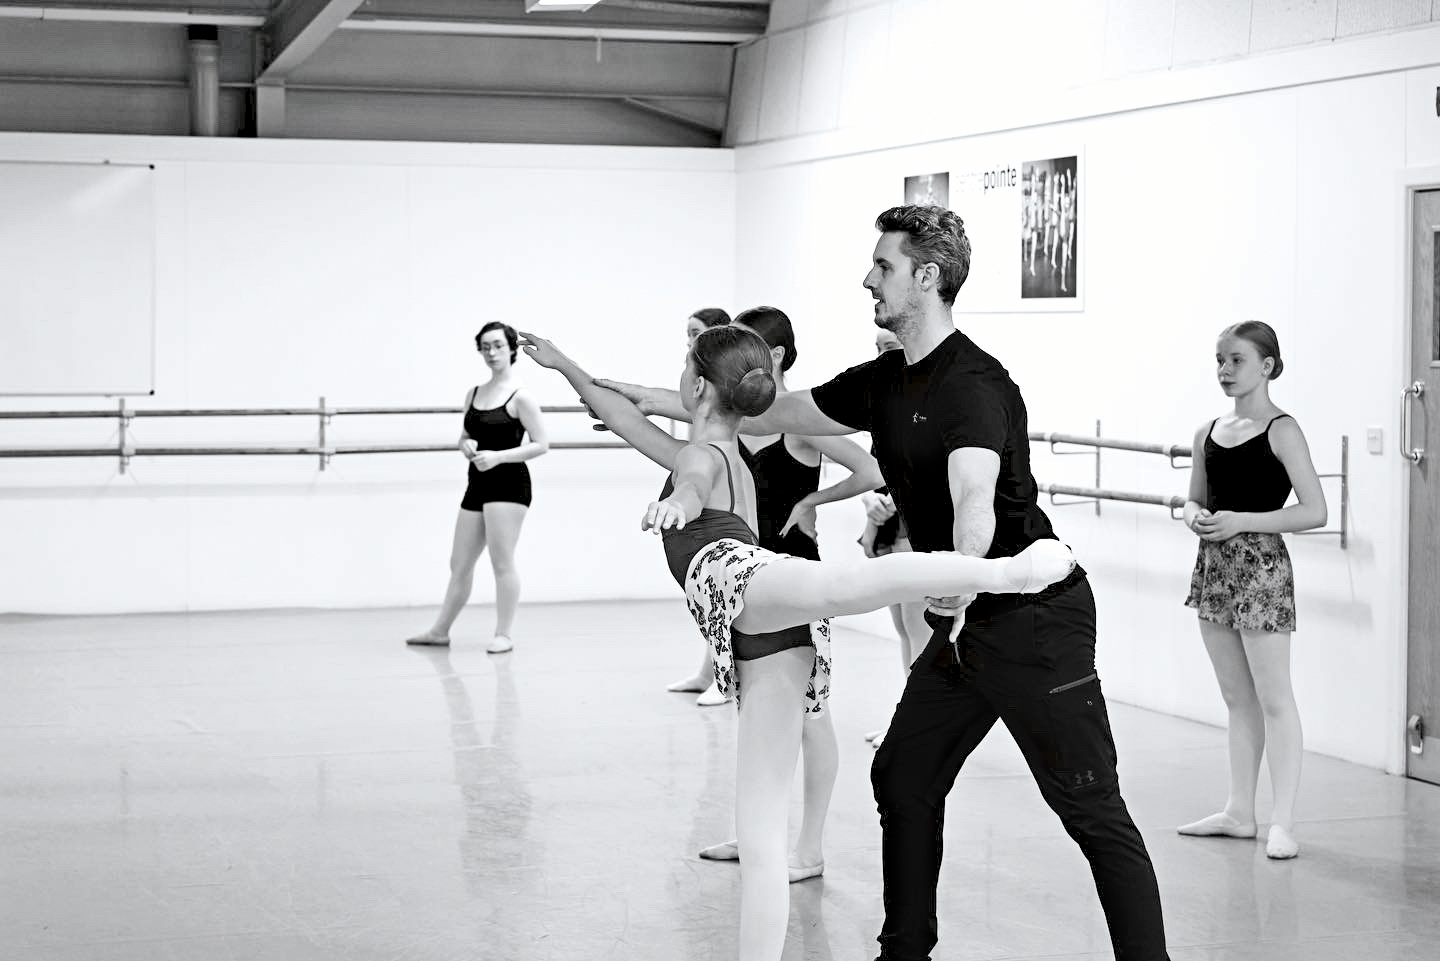 In this black and white photo, Iain Mackay, a ballet teacher, is shown working with a young female student as she poses in first arabesque. He stands behind her and uses his hands to lengthen her leg and front arm. Four other ballet students stand behind them and to their left, watching. The dancers wear pink tights, ballet slippers, leotards and ballet skirts. Mackay is wearing a black T-shirt and black athletic pants.